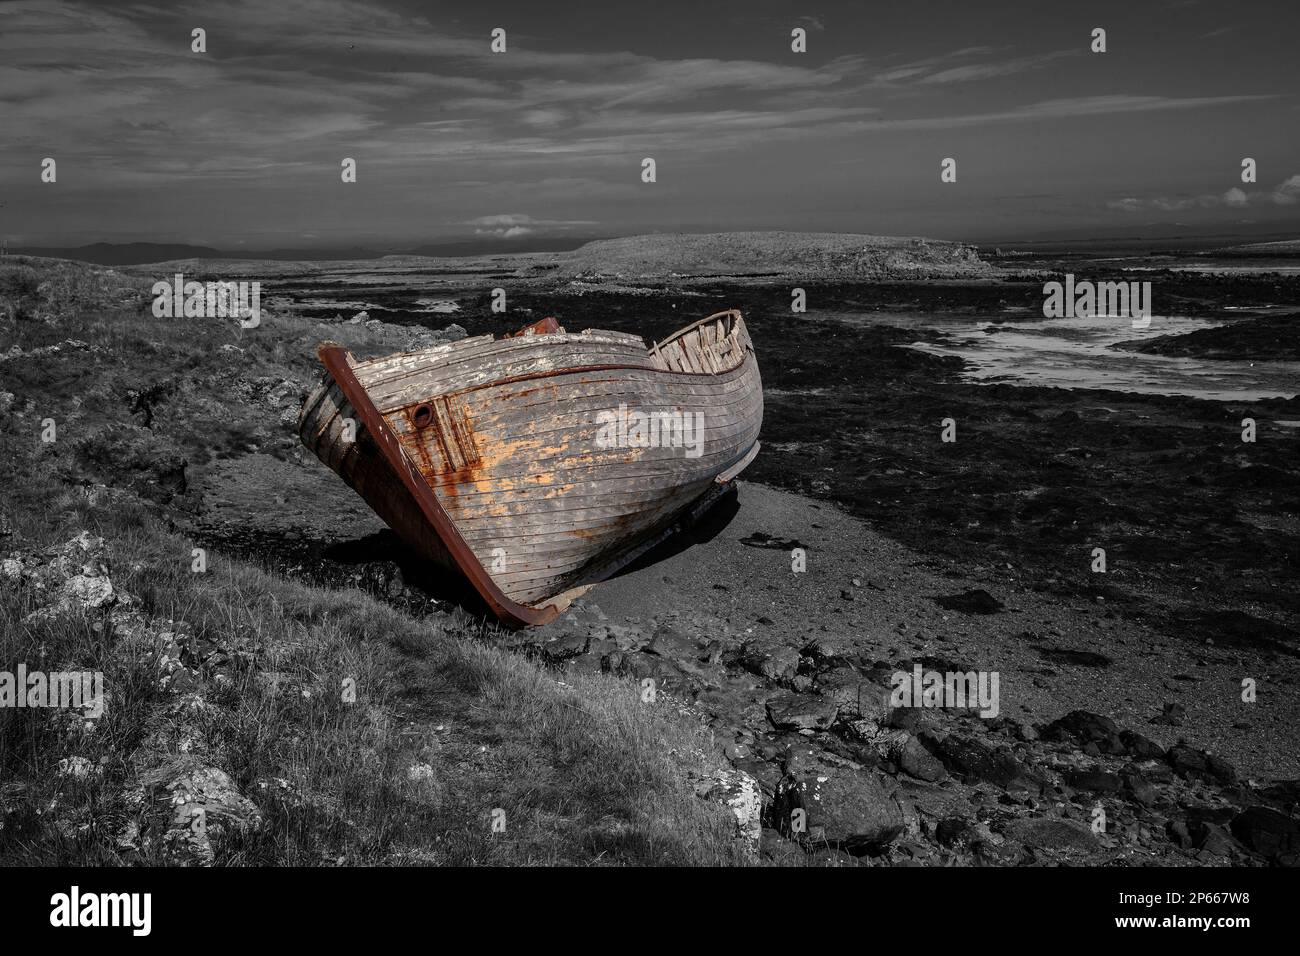 Artistic rendition of a wrecked wooden boat in a bay in Iceland against a monochrome background Stock Photo